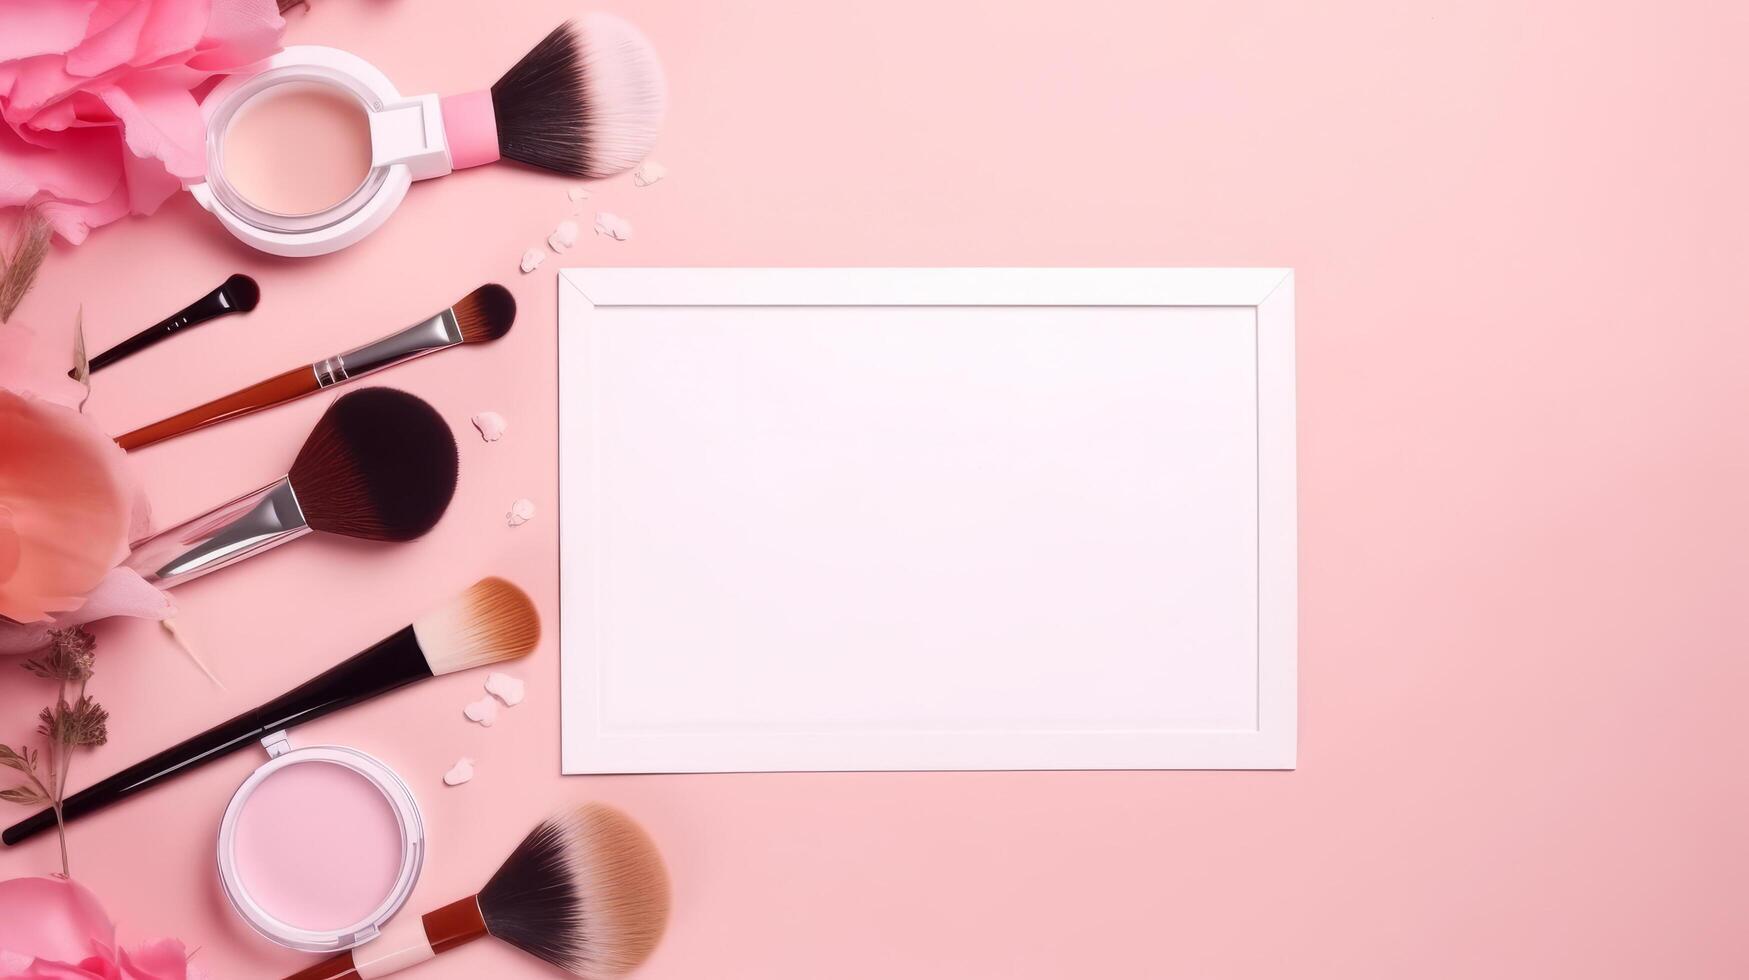 Empty frame with makeup tools. Illustration photo